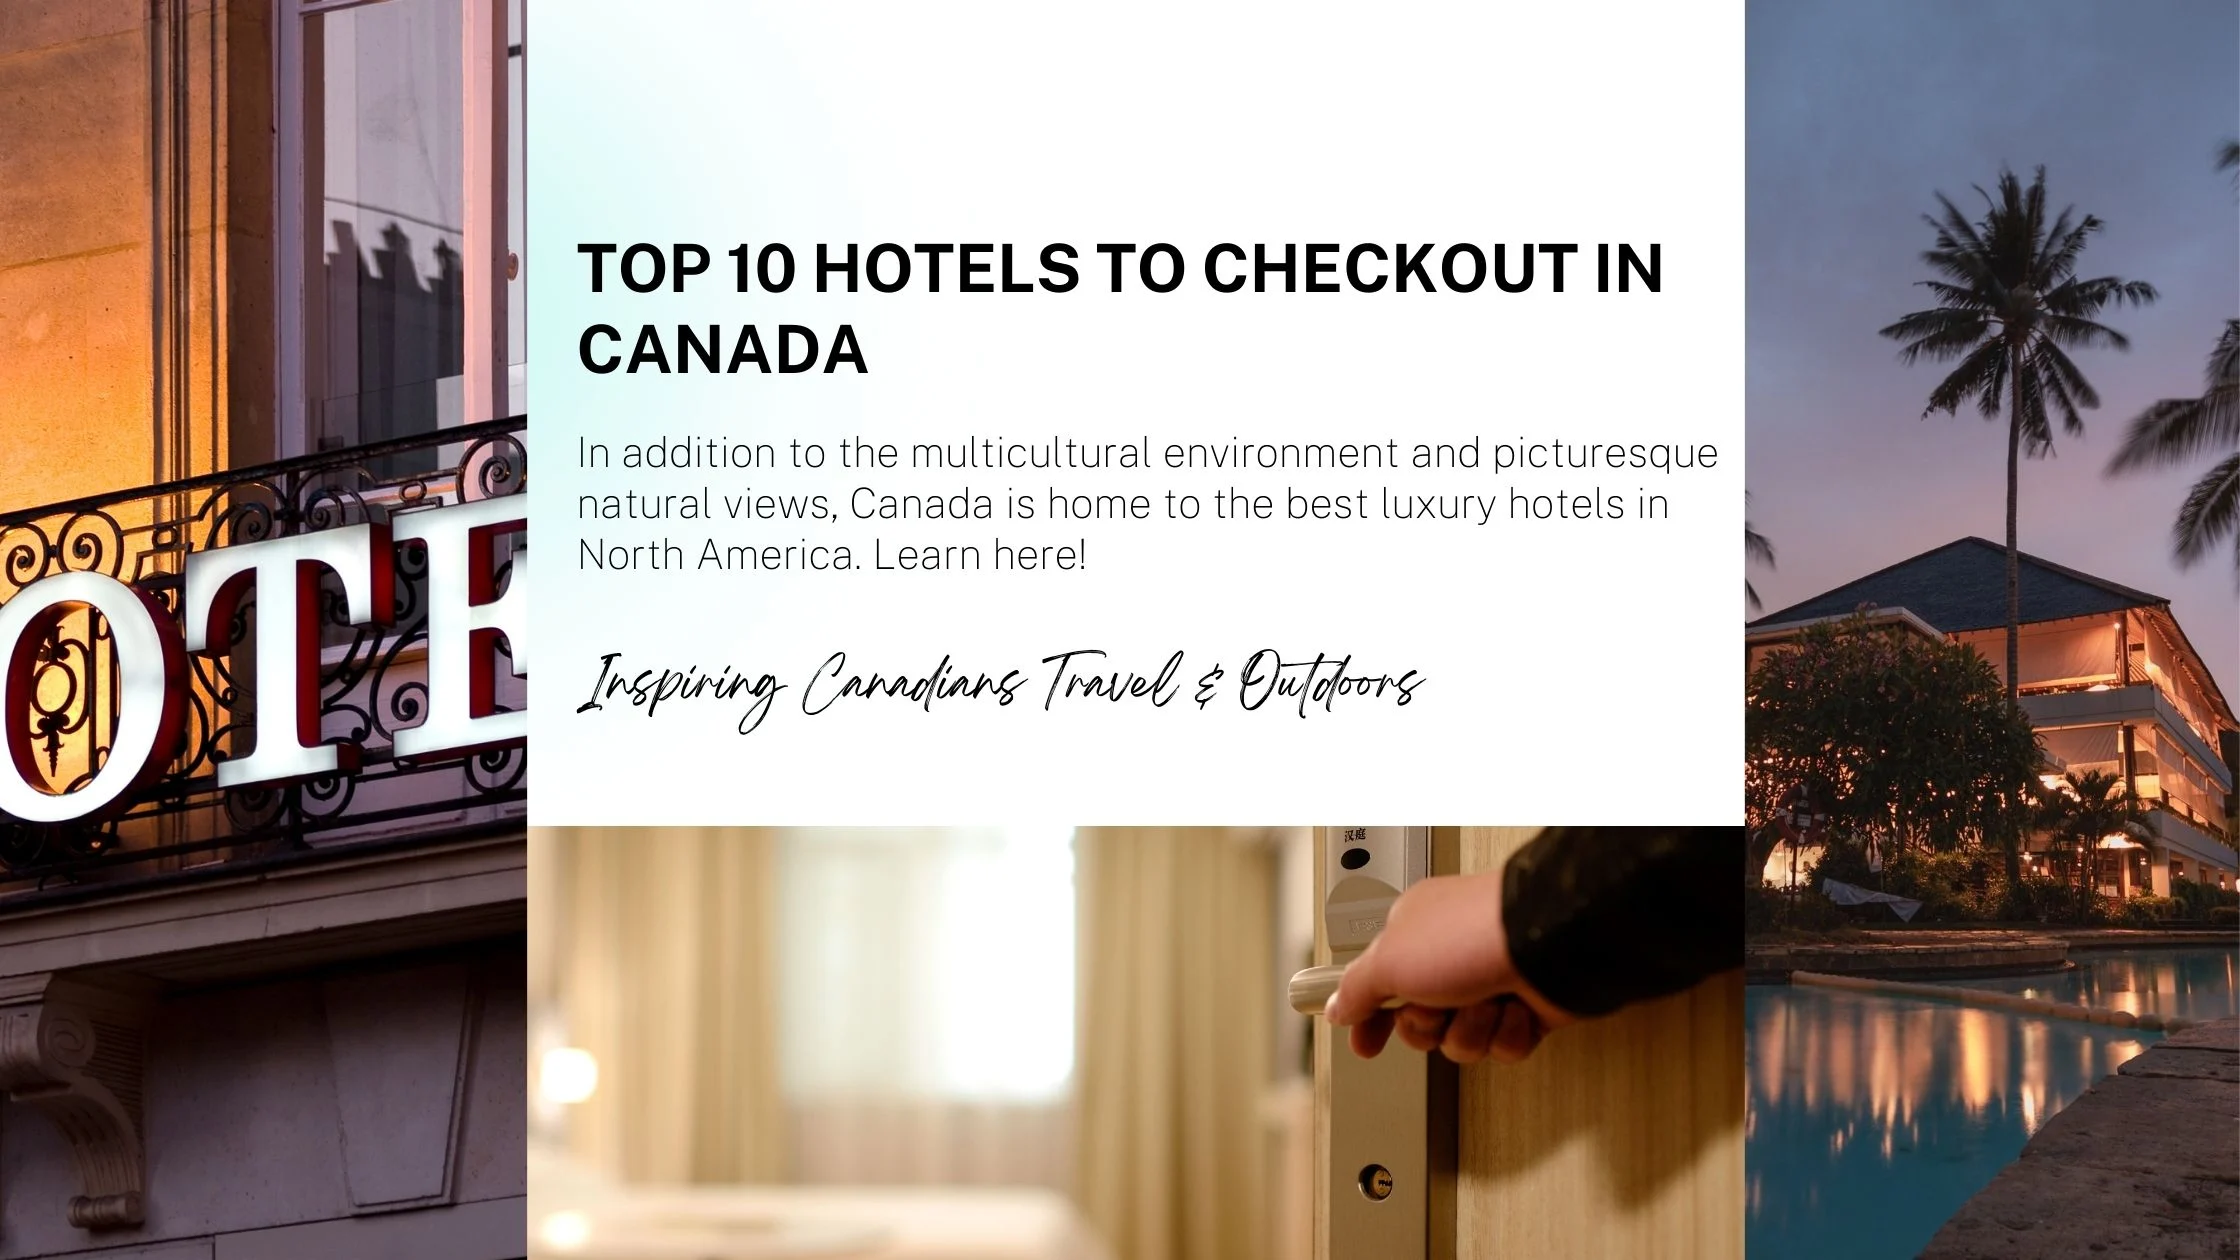 Top 10 Hotels to Checkout in Canada